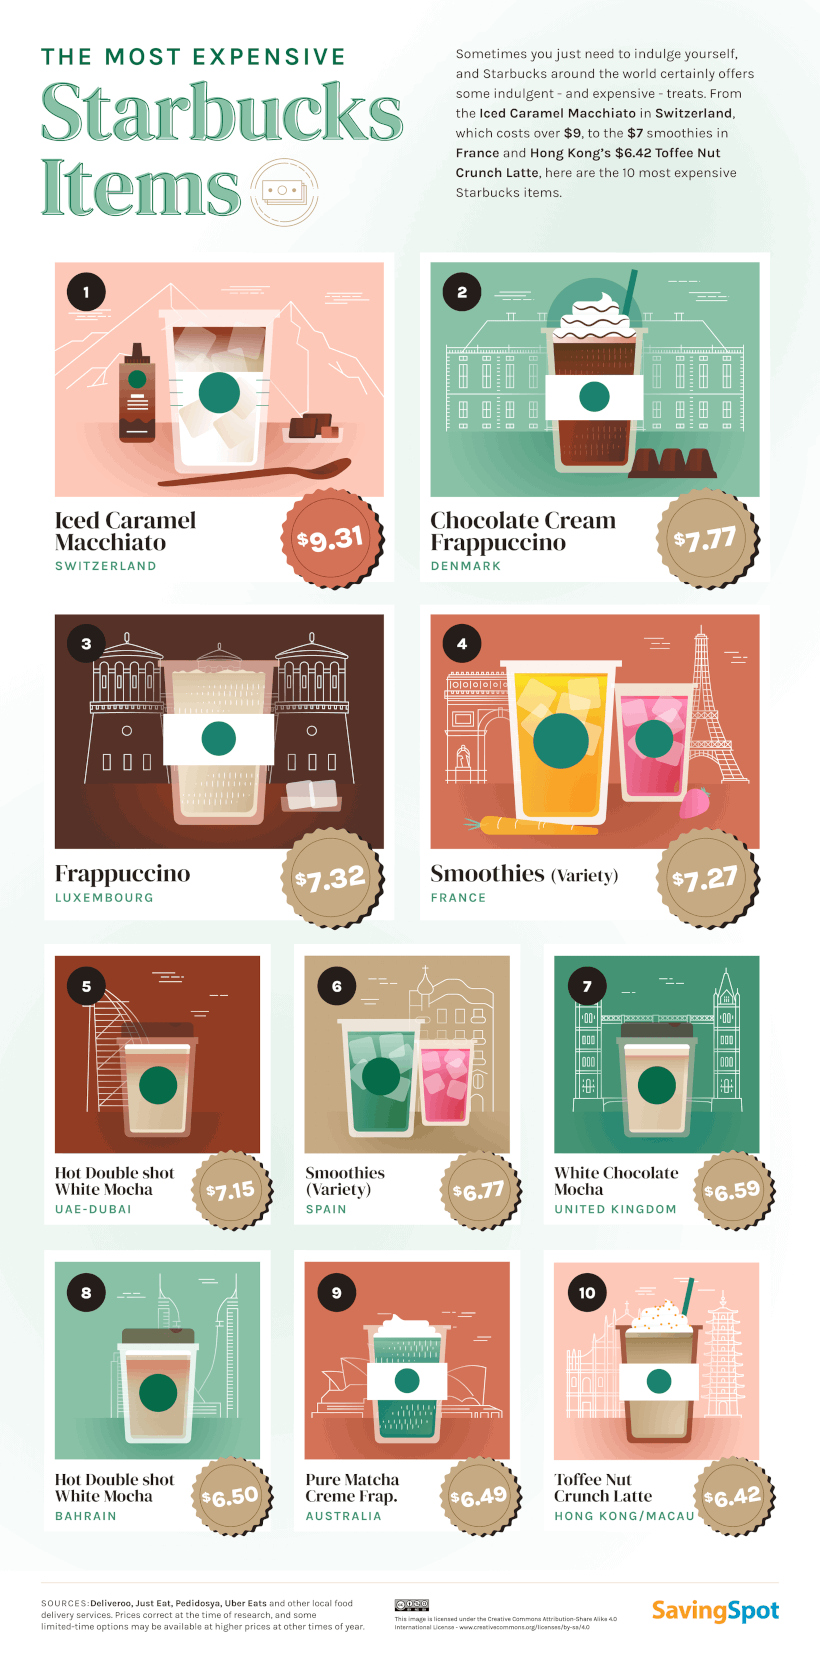 A graphic showing the 10 most expensive items at Starbucks. The Iced Caramel Macchiato in Switzerland costs $9.31.